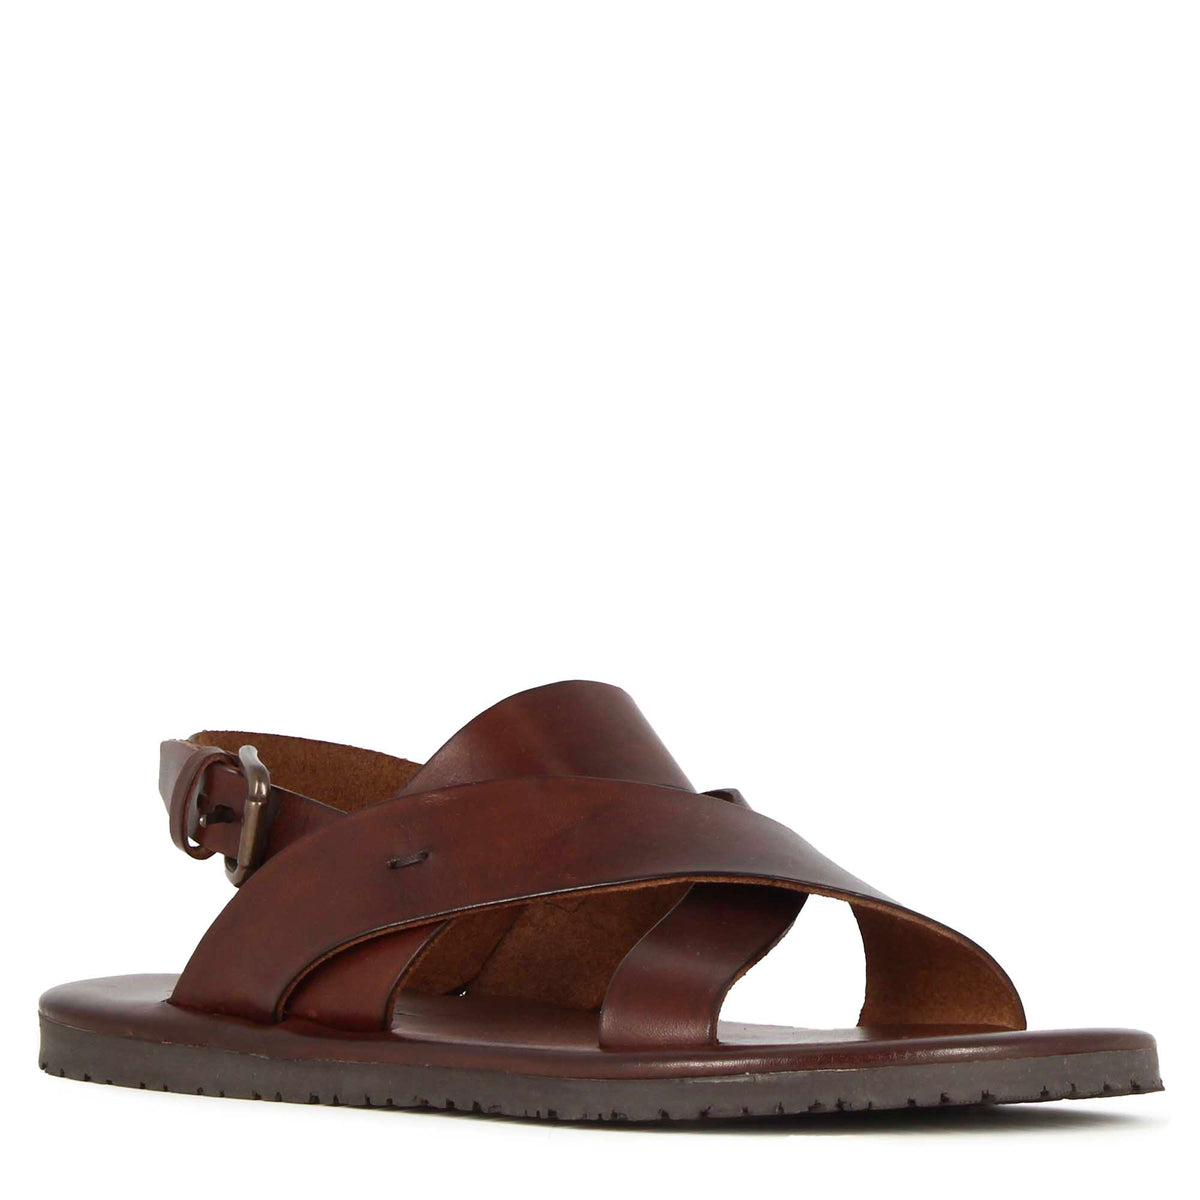 Handmade men's brown leather thong sandals, The leather craftsmen